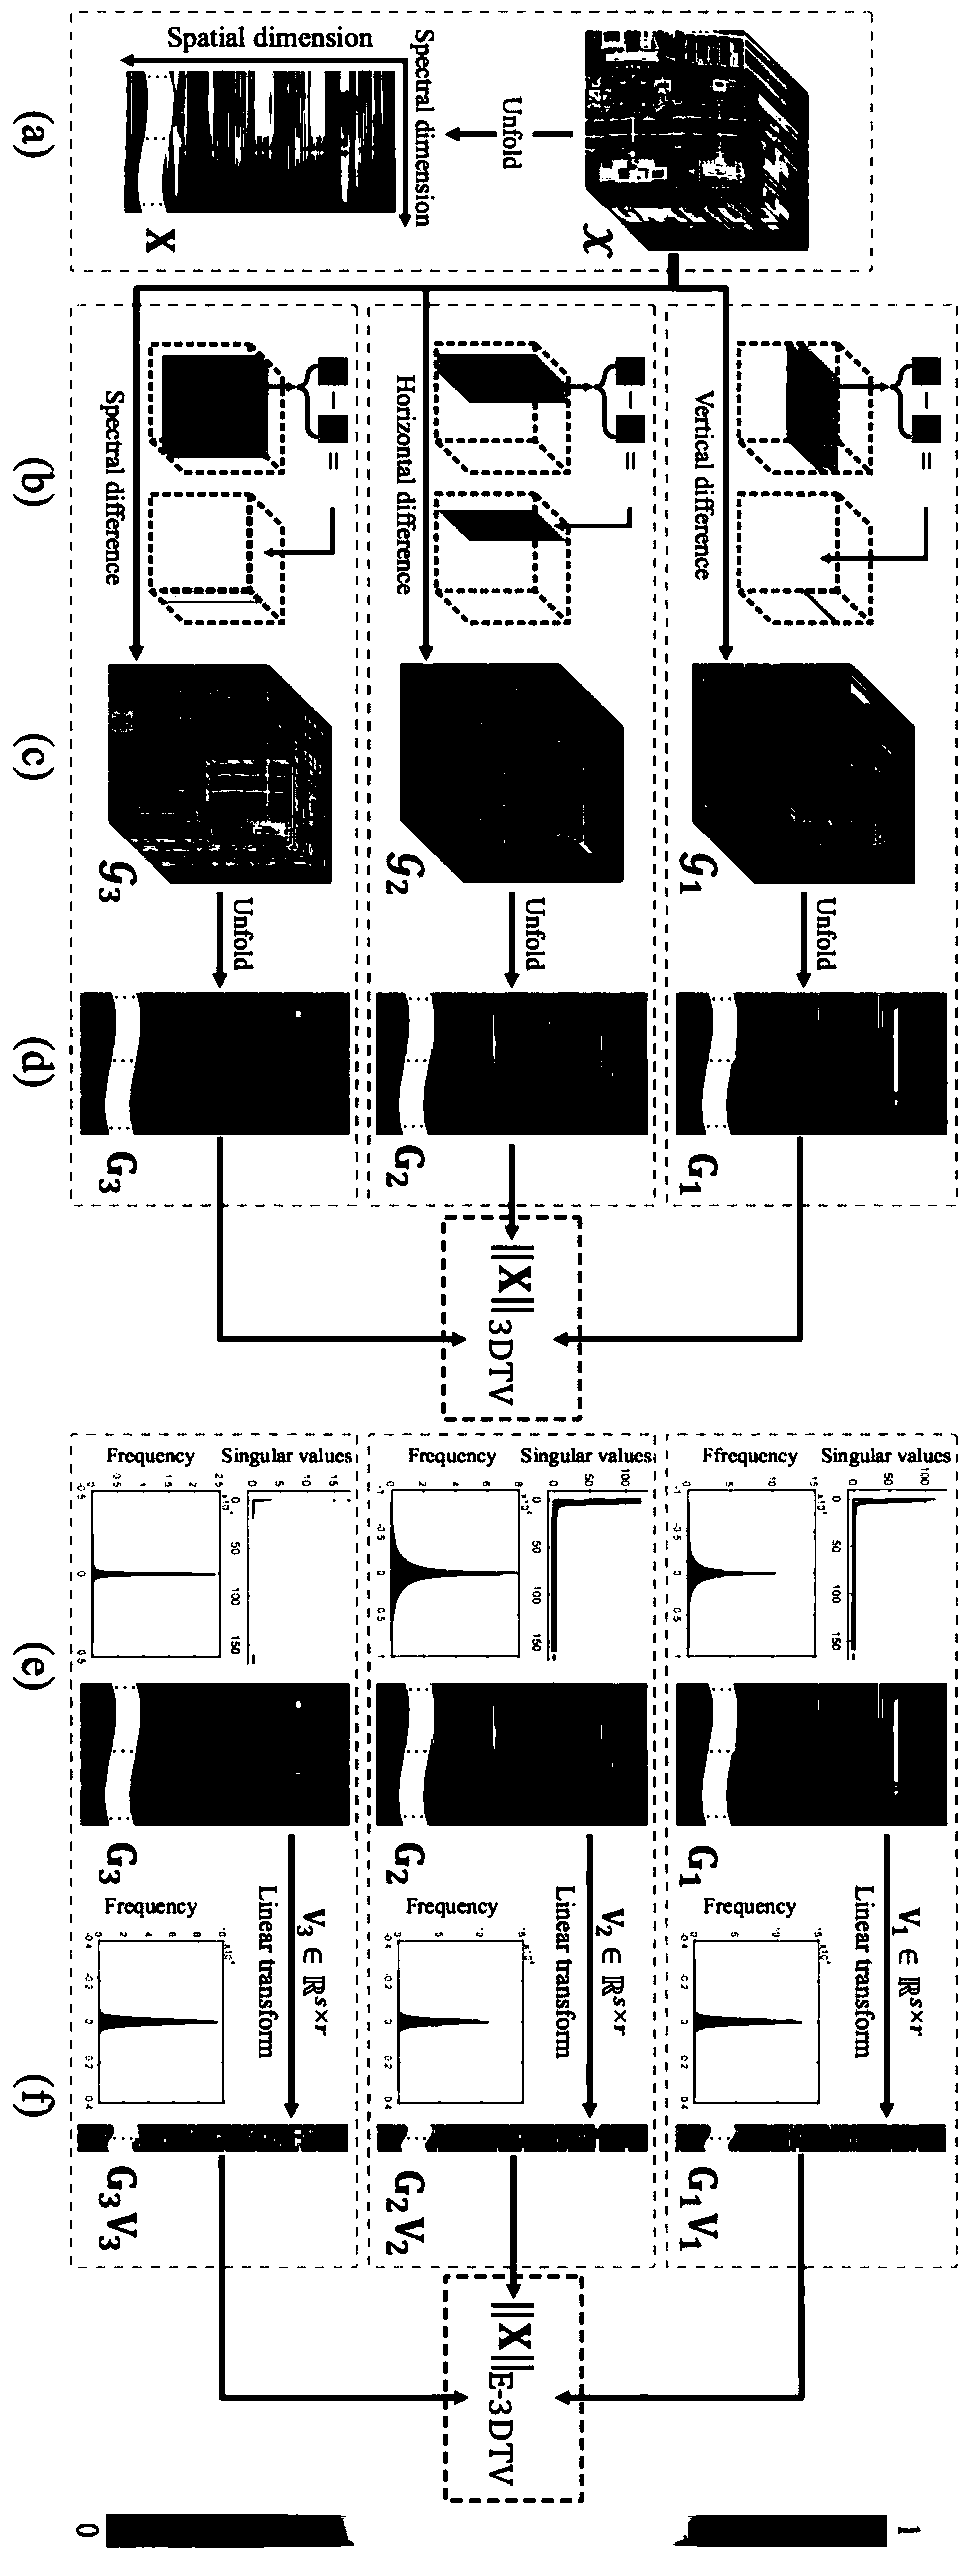 A hyperspectral image inpainting method based on E-3DTV regularity